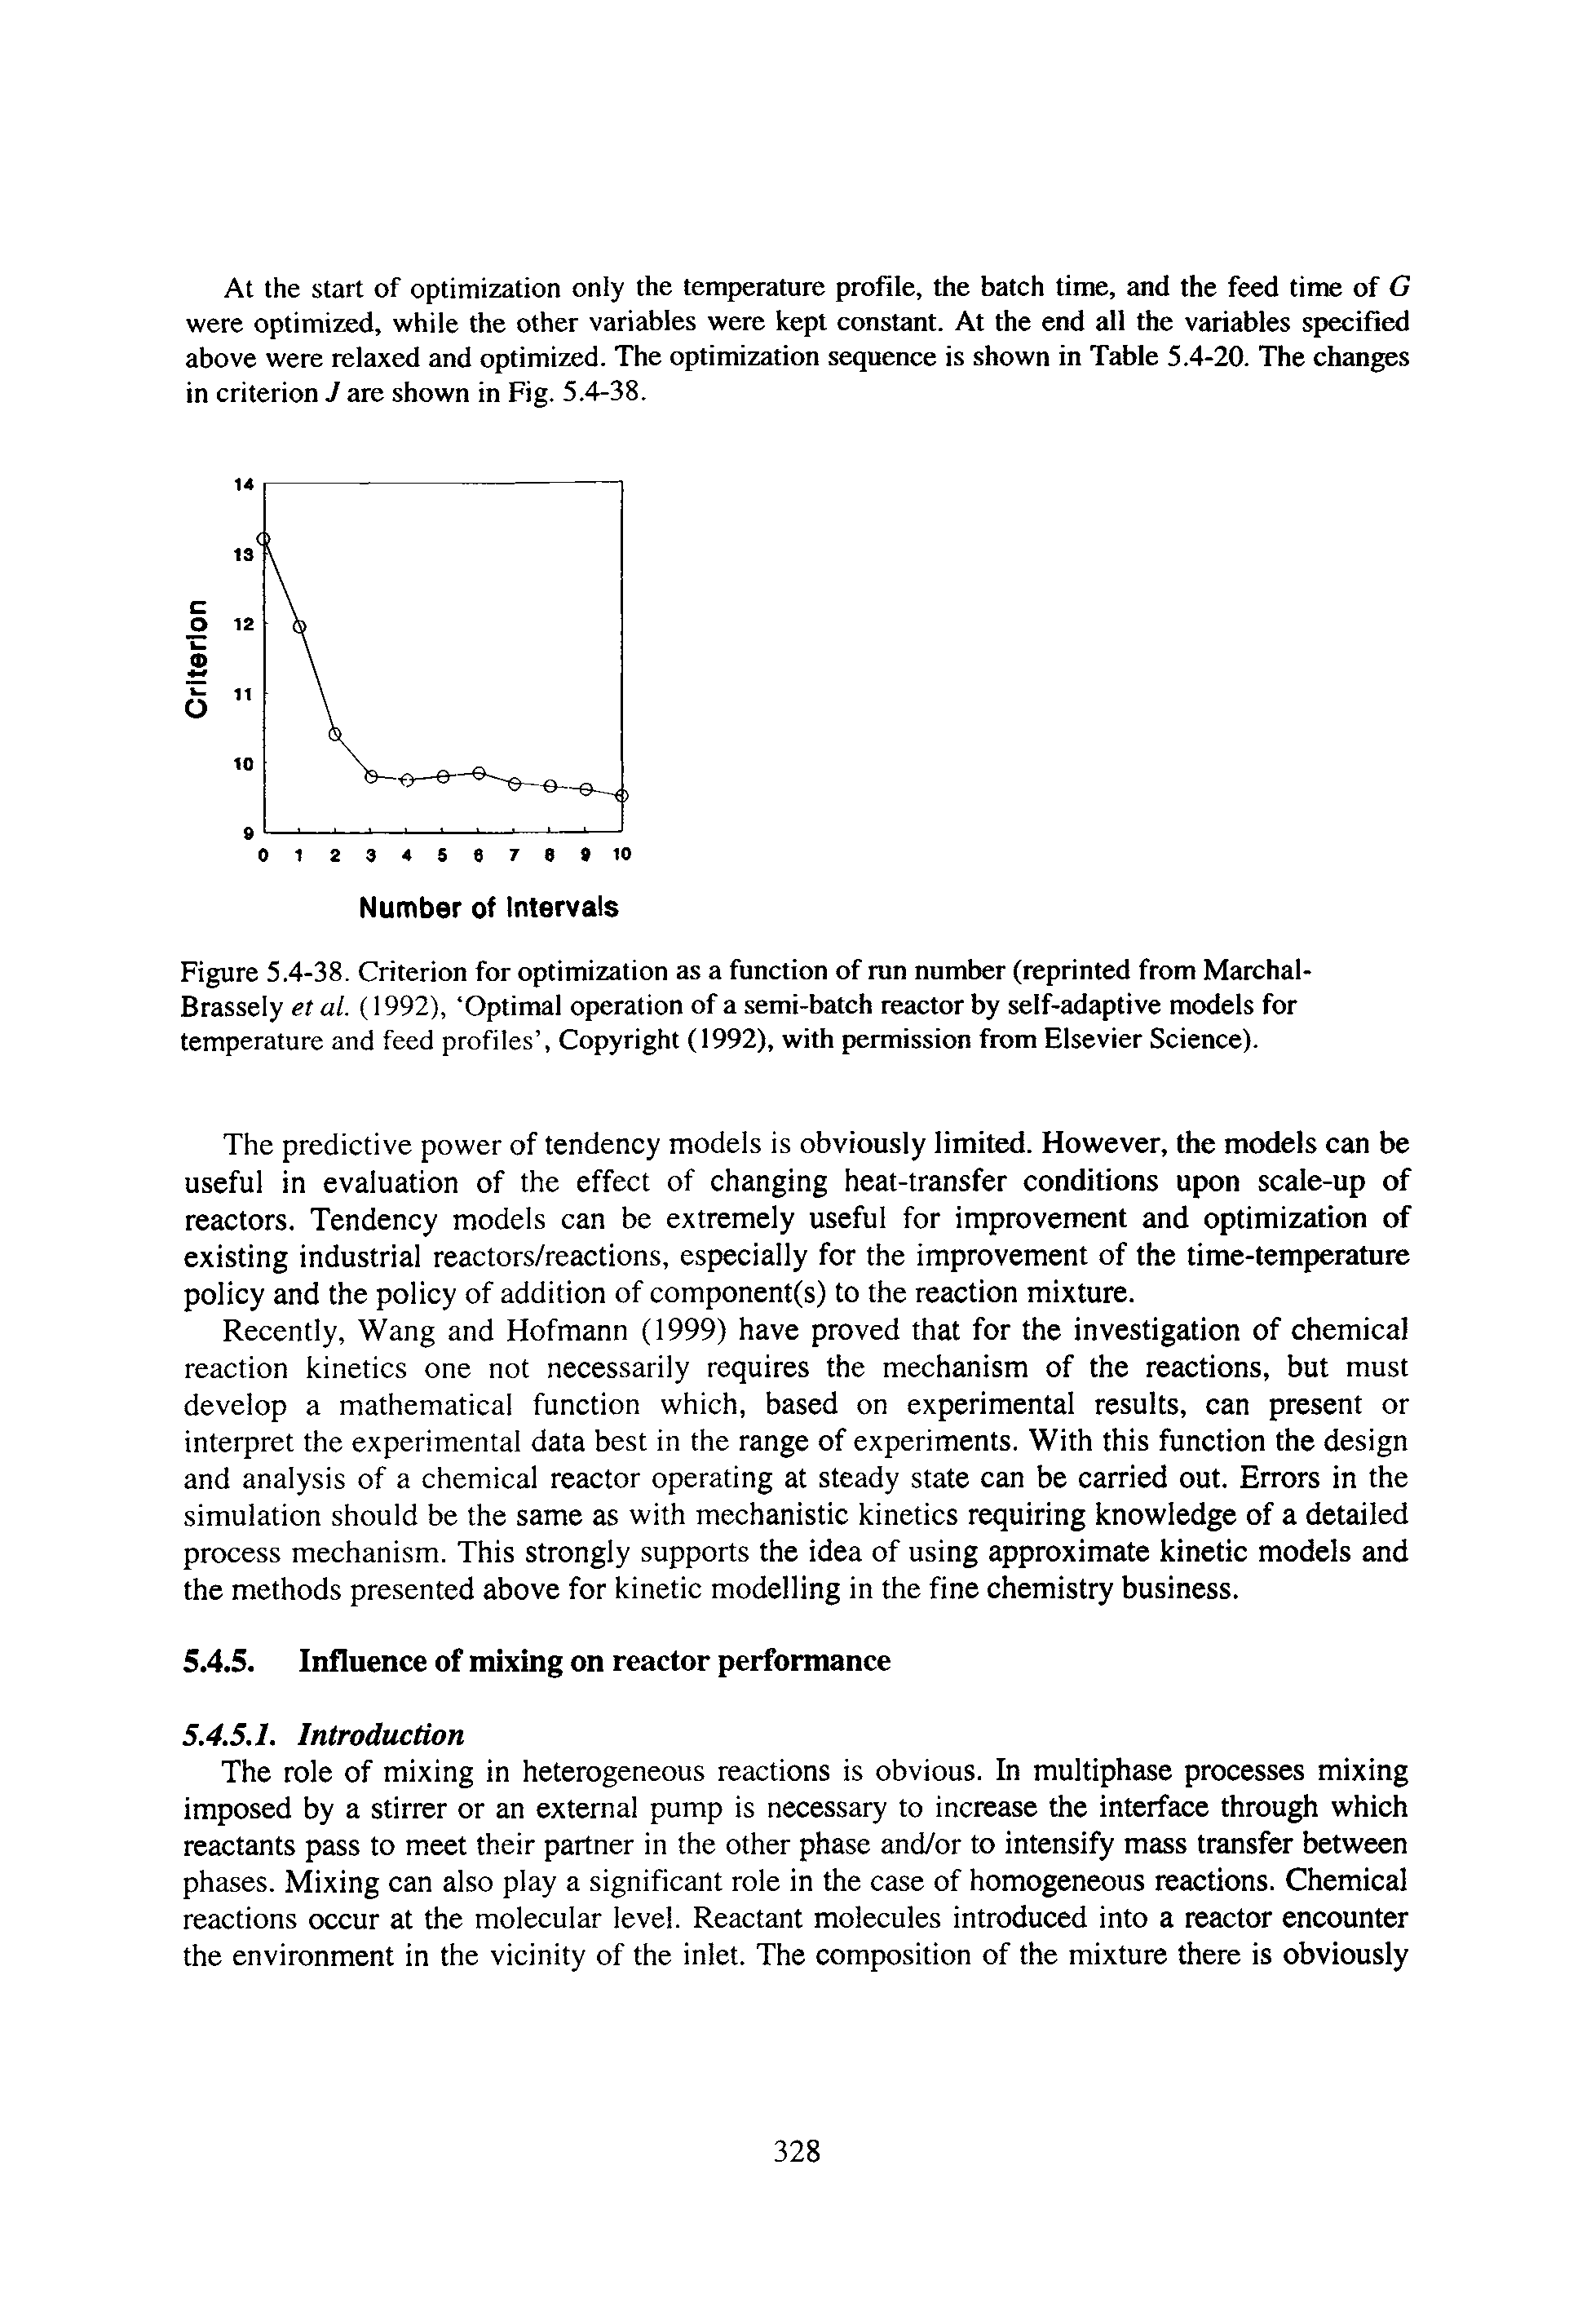 Figure 5.4-38. Criterion for optimization as a function of run number (reprinted from Marchal-Brassely et al. (1992), Optimal operation of a semi-batch reactor by self-adaptive models for temperature and feed profiles . Copyright (1992), with permission from Elsevier Science).